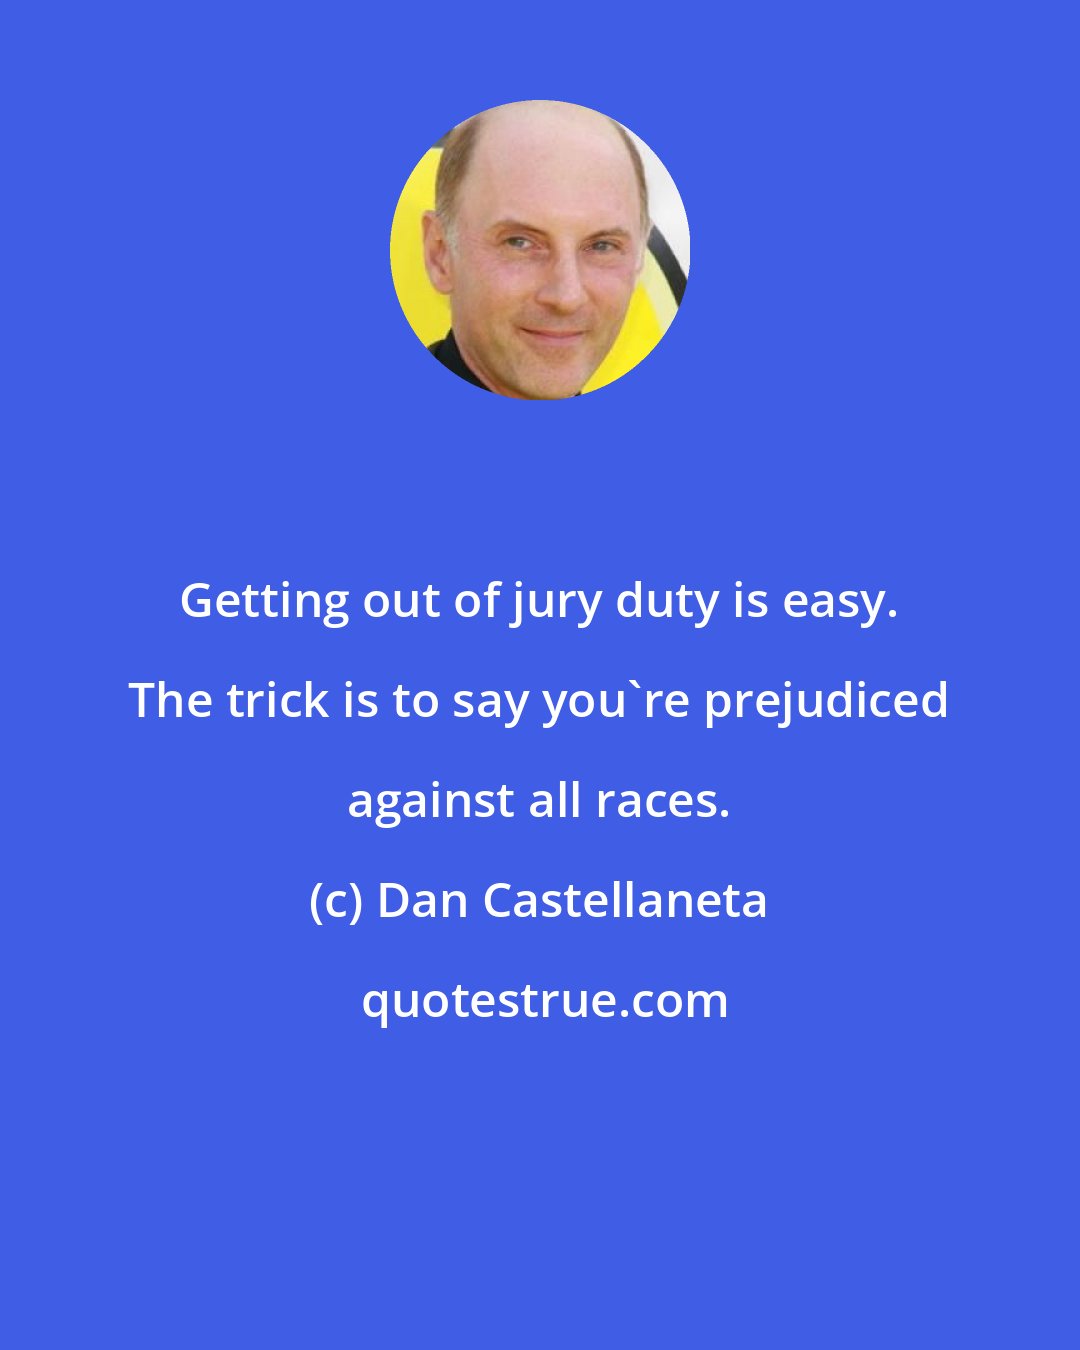 Dan Castellaneta: Getting out of jury duty is easy. The trick is to say you're prejudiced against all races.